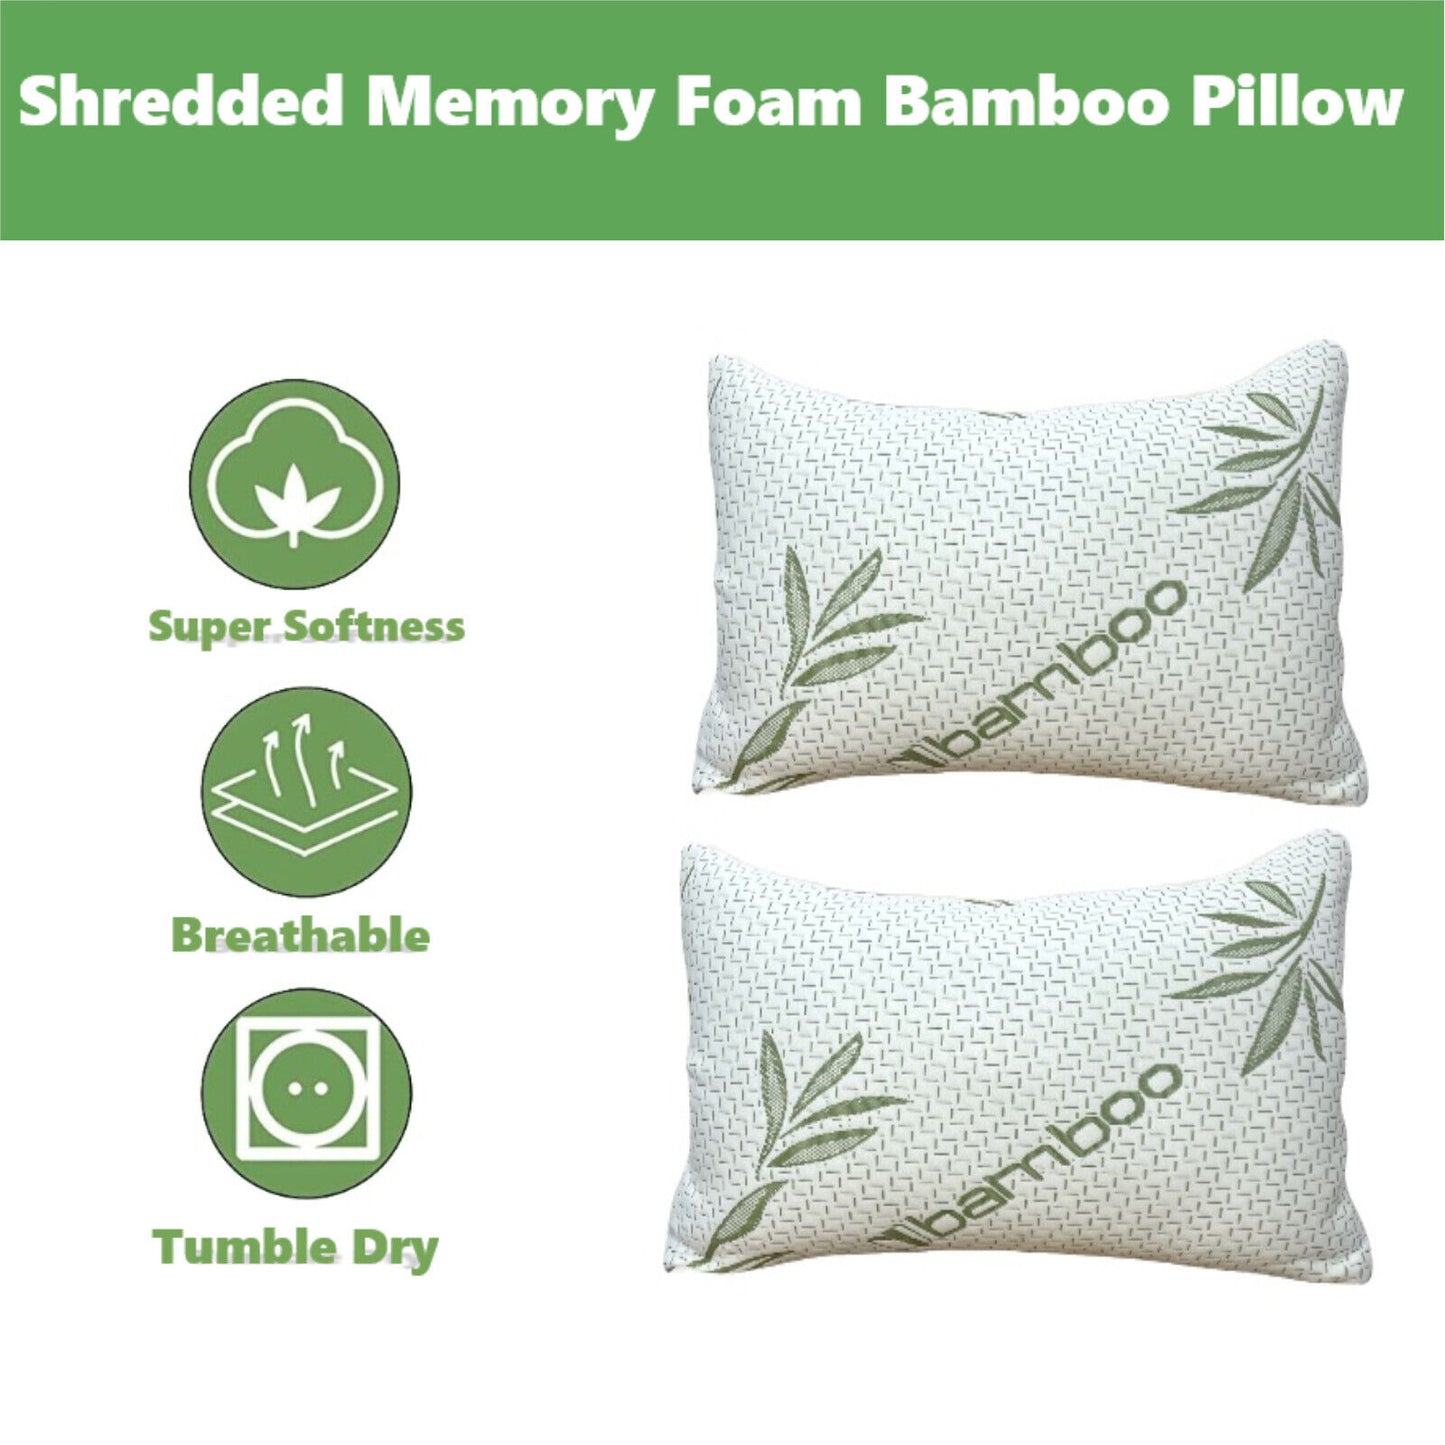 Bamboo Pillow Memory Foam Soft with Removable Cover